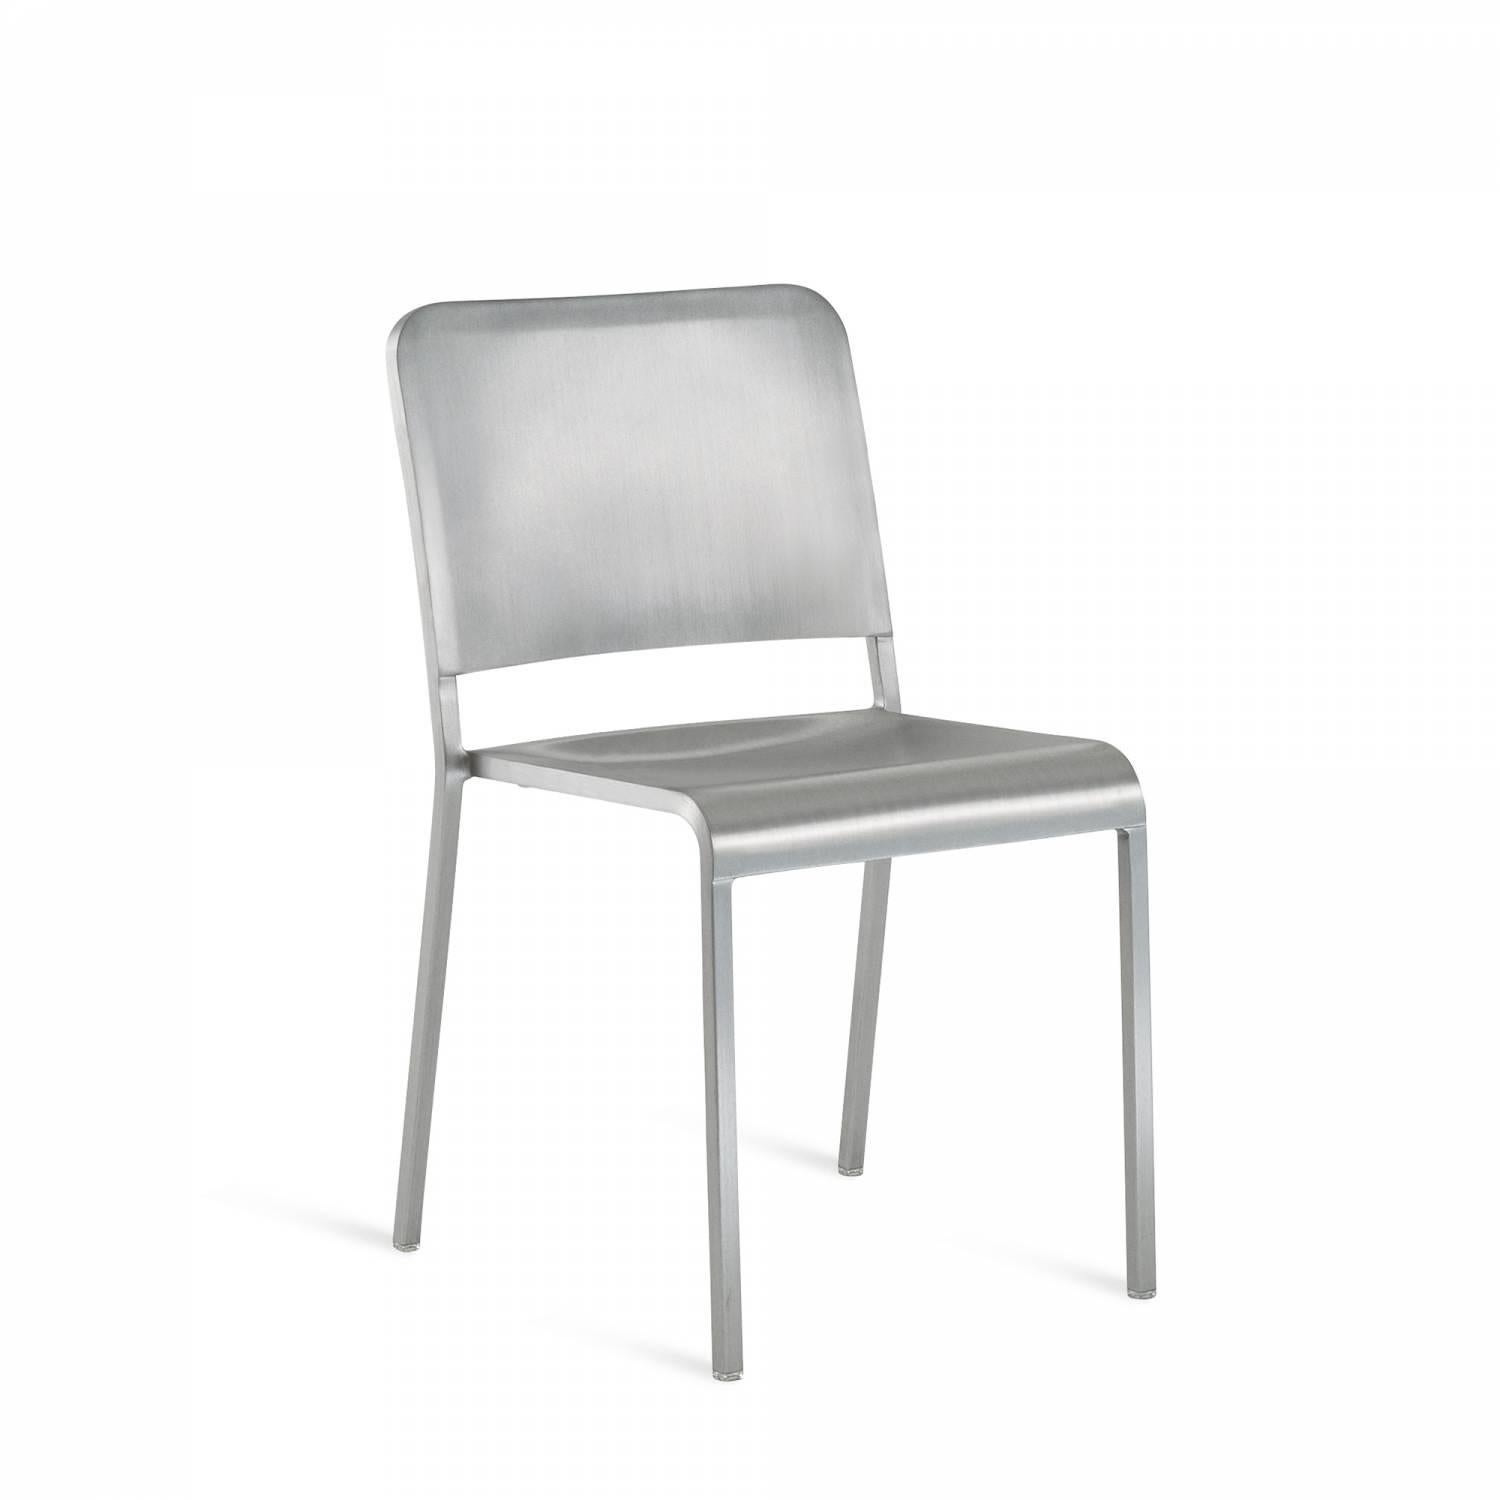 Emeco’s collaboration with Norman Foster resulted in the “20-06” Stacking chair. Foster envisioned a more “neutral” stacking chair-visually and physically lightweight. But the 20-06 is also super strong-tested to 445Kg. Lord Norman Foster said” I